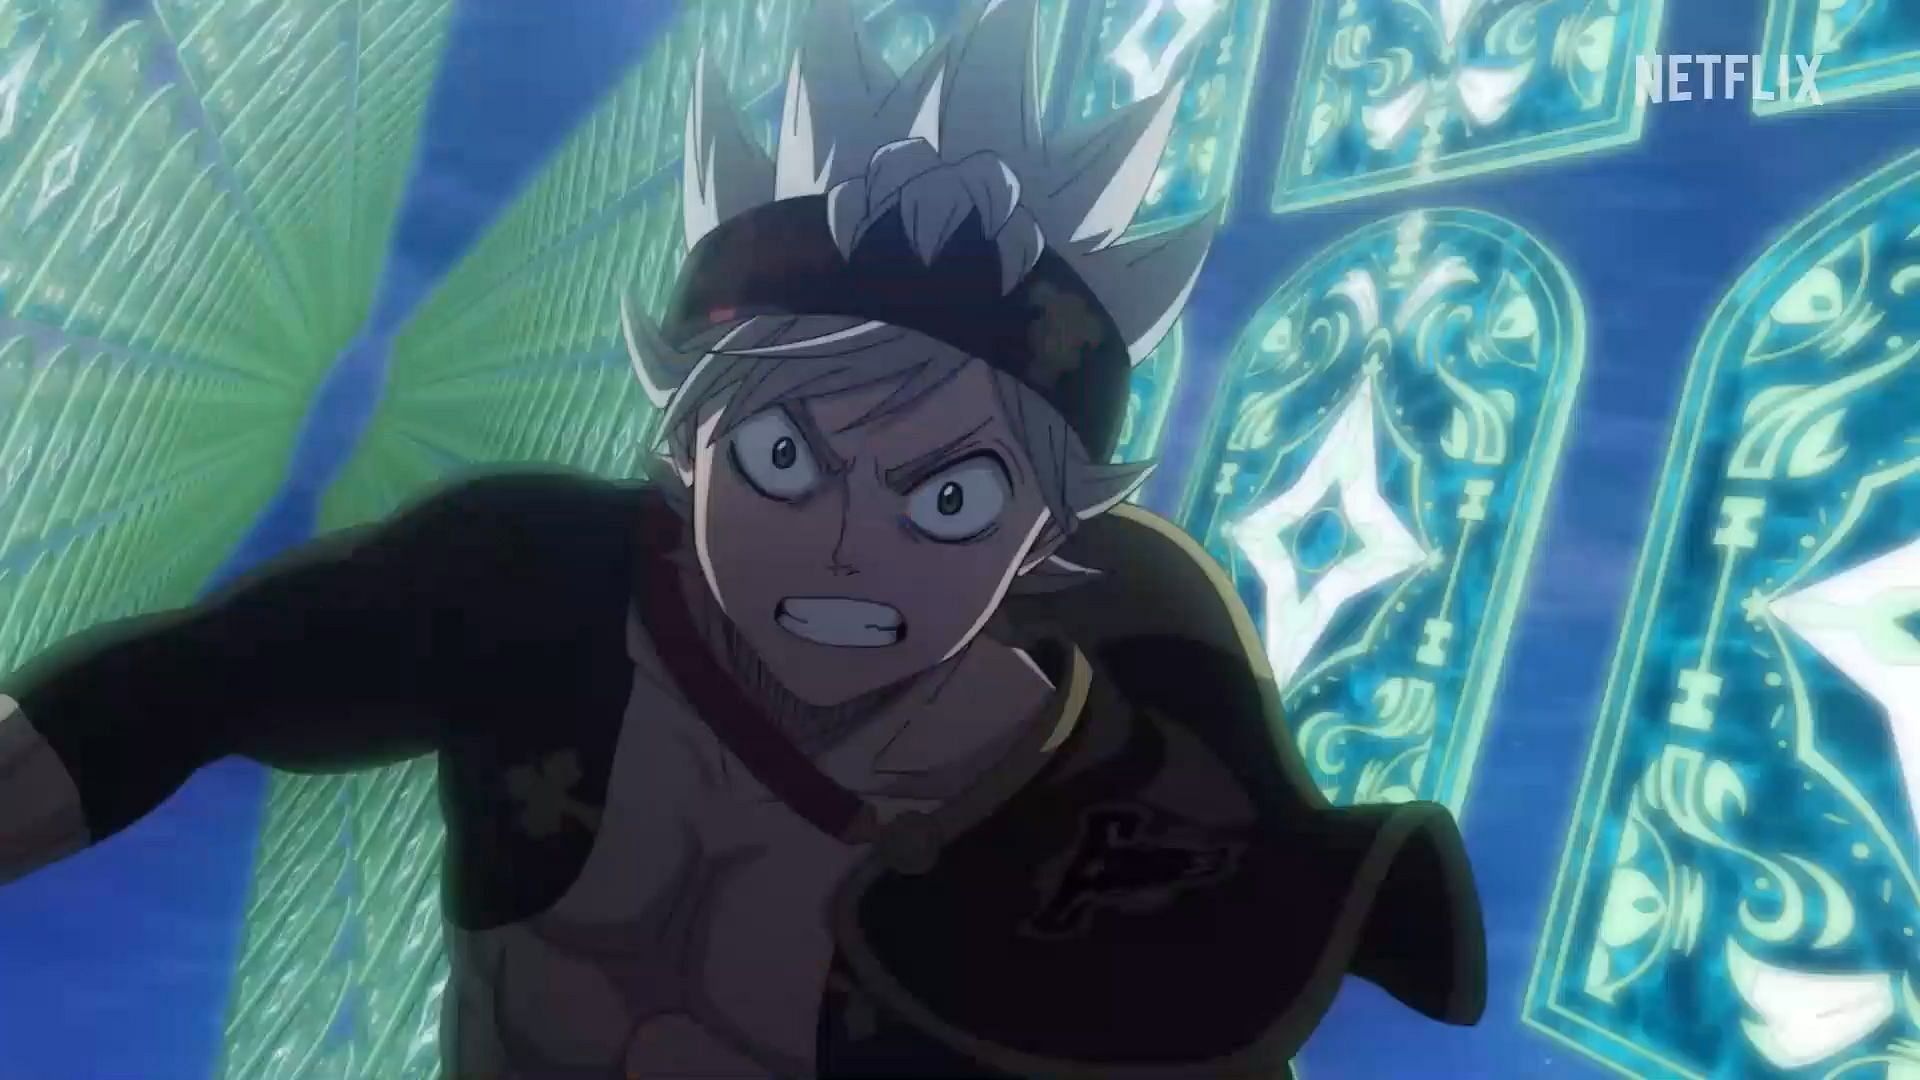 Asta and co are set to face massive threats in the guise of former Wizard Kings according to the latest Black Clover movie leaks (Image via Studio Pierrot)